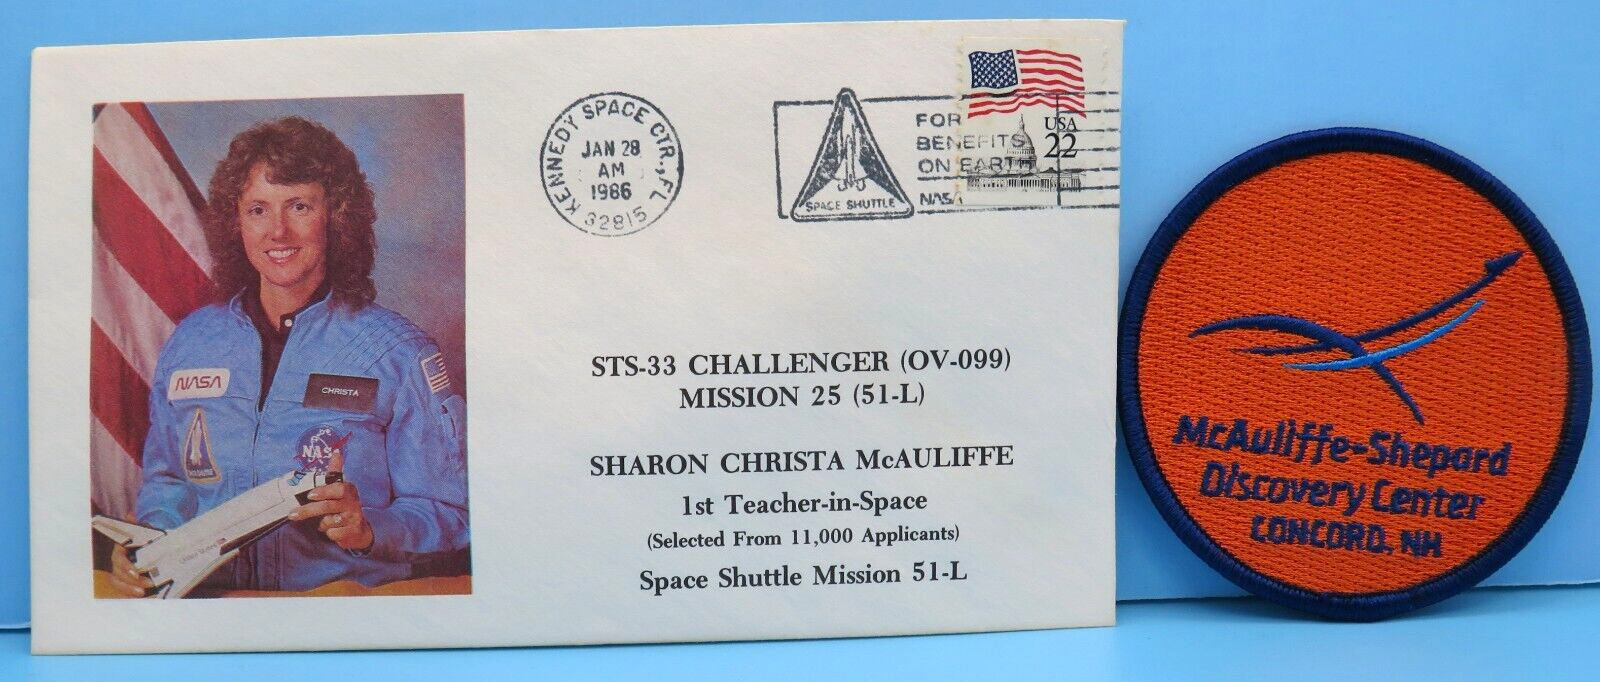 NASA Postal Cover PATCH vtg Christa McAuliffe STS-51L Space Shuttle CHALLENGER